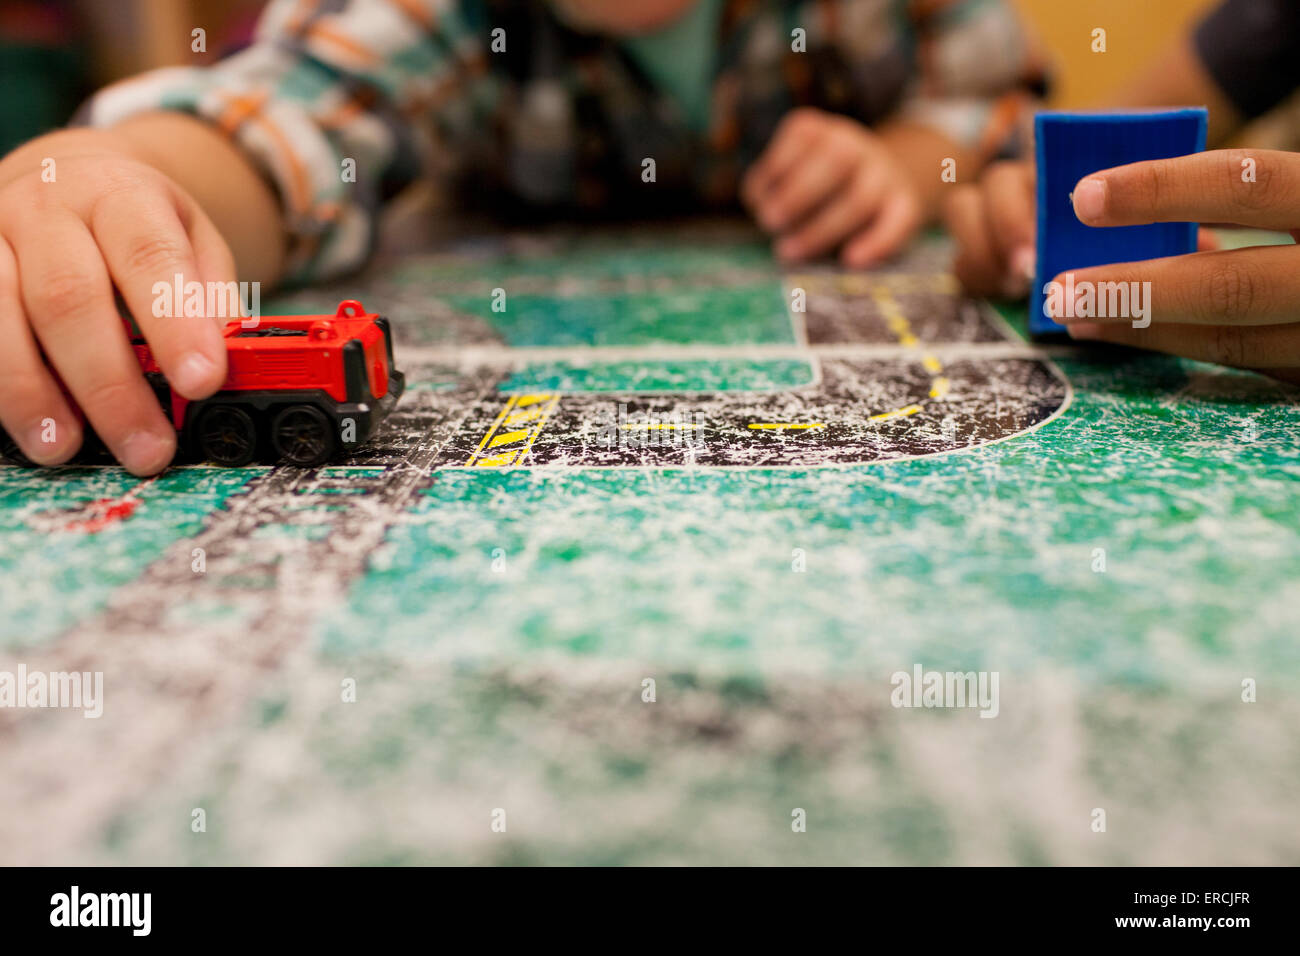 Two young boys play with toy cars on a roadmap table. Stock Photo